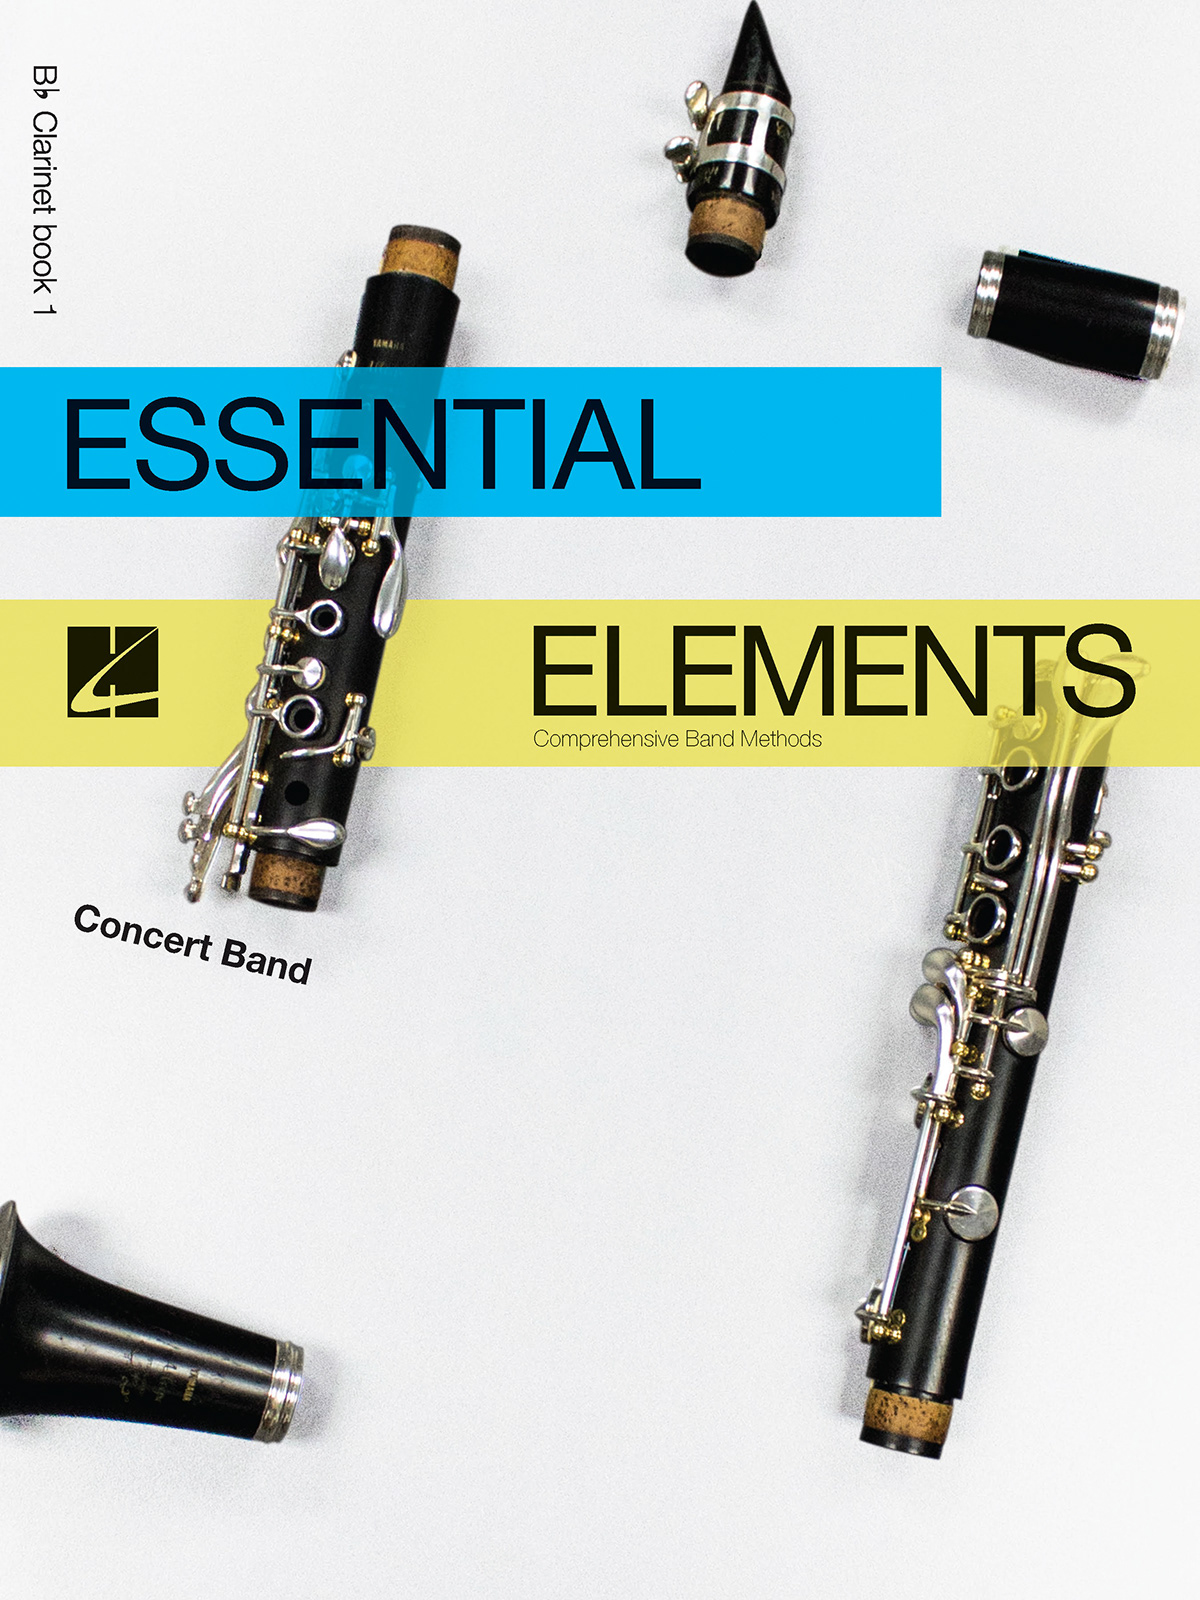 instruments sheet music redesign cover book magazine